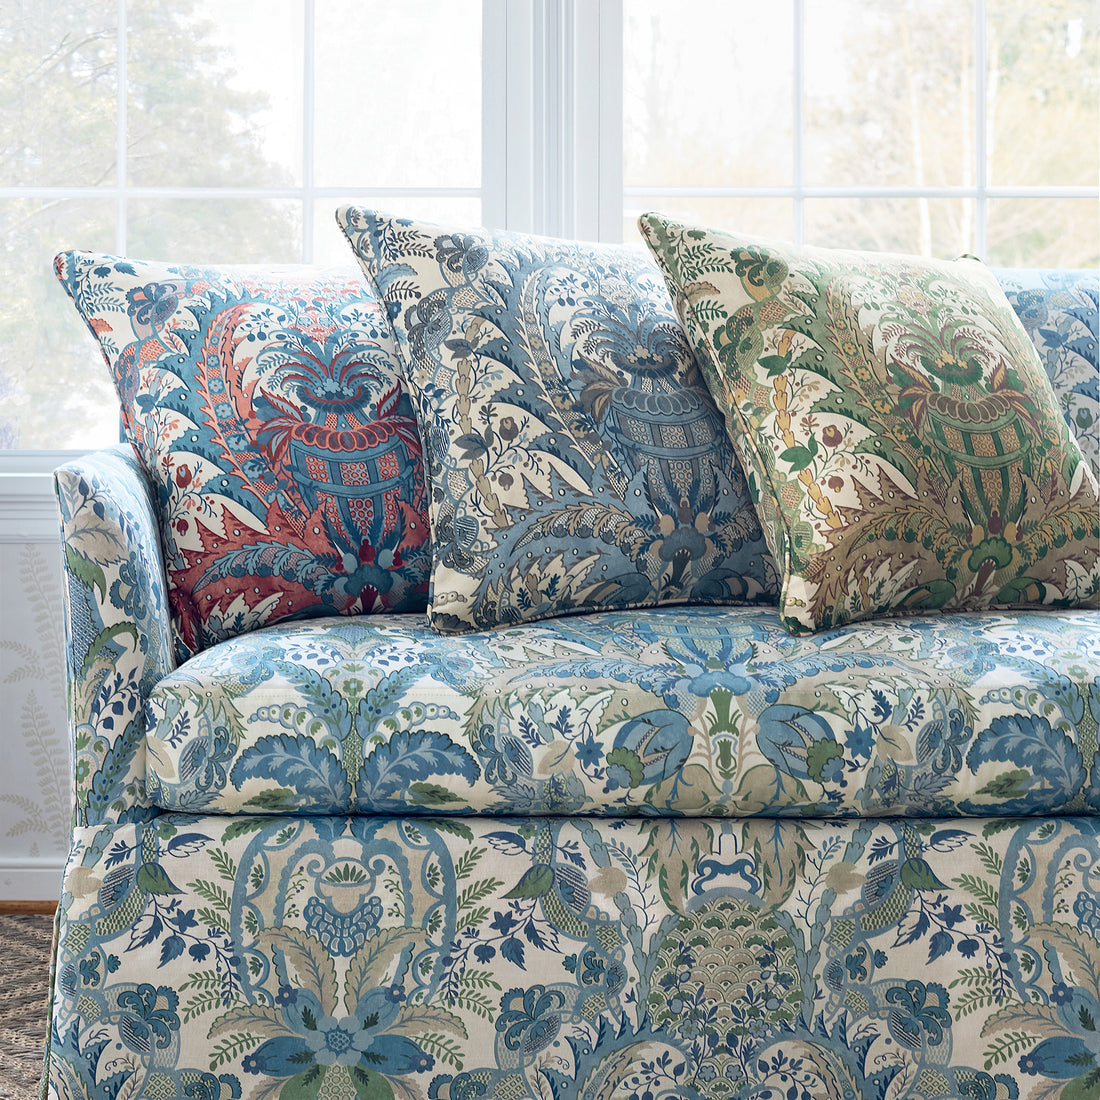 Collection of addison sofa with skirt and pillow fabrics in Narbeth printed fabric featuring natural and green color fabric - pattern number AF57860 - by Anna French in the Bristol collection